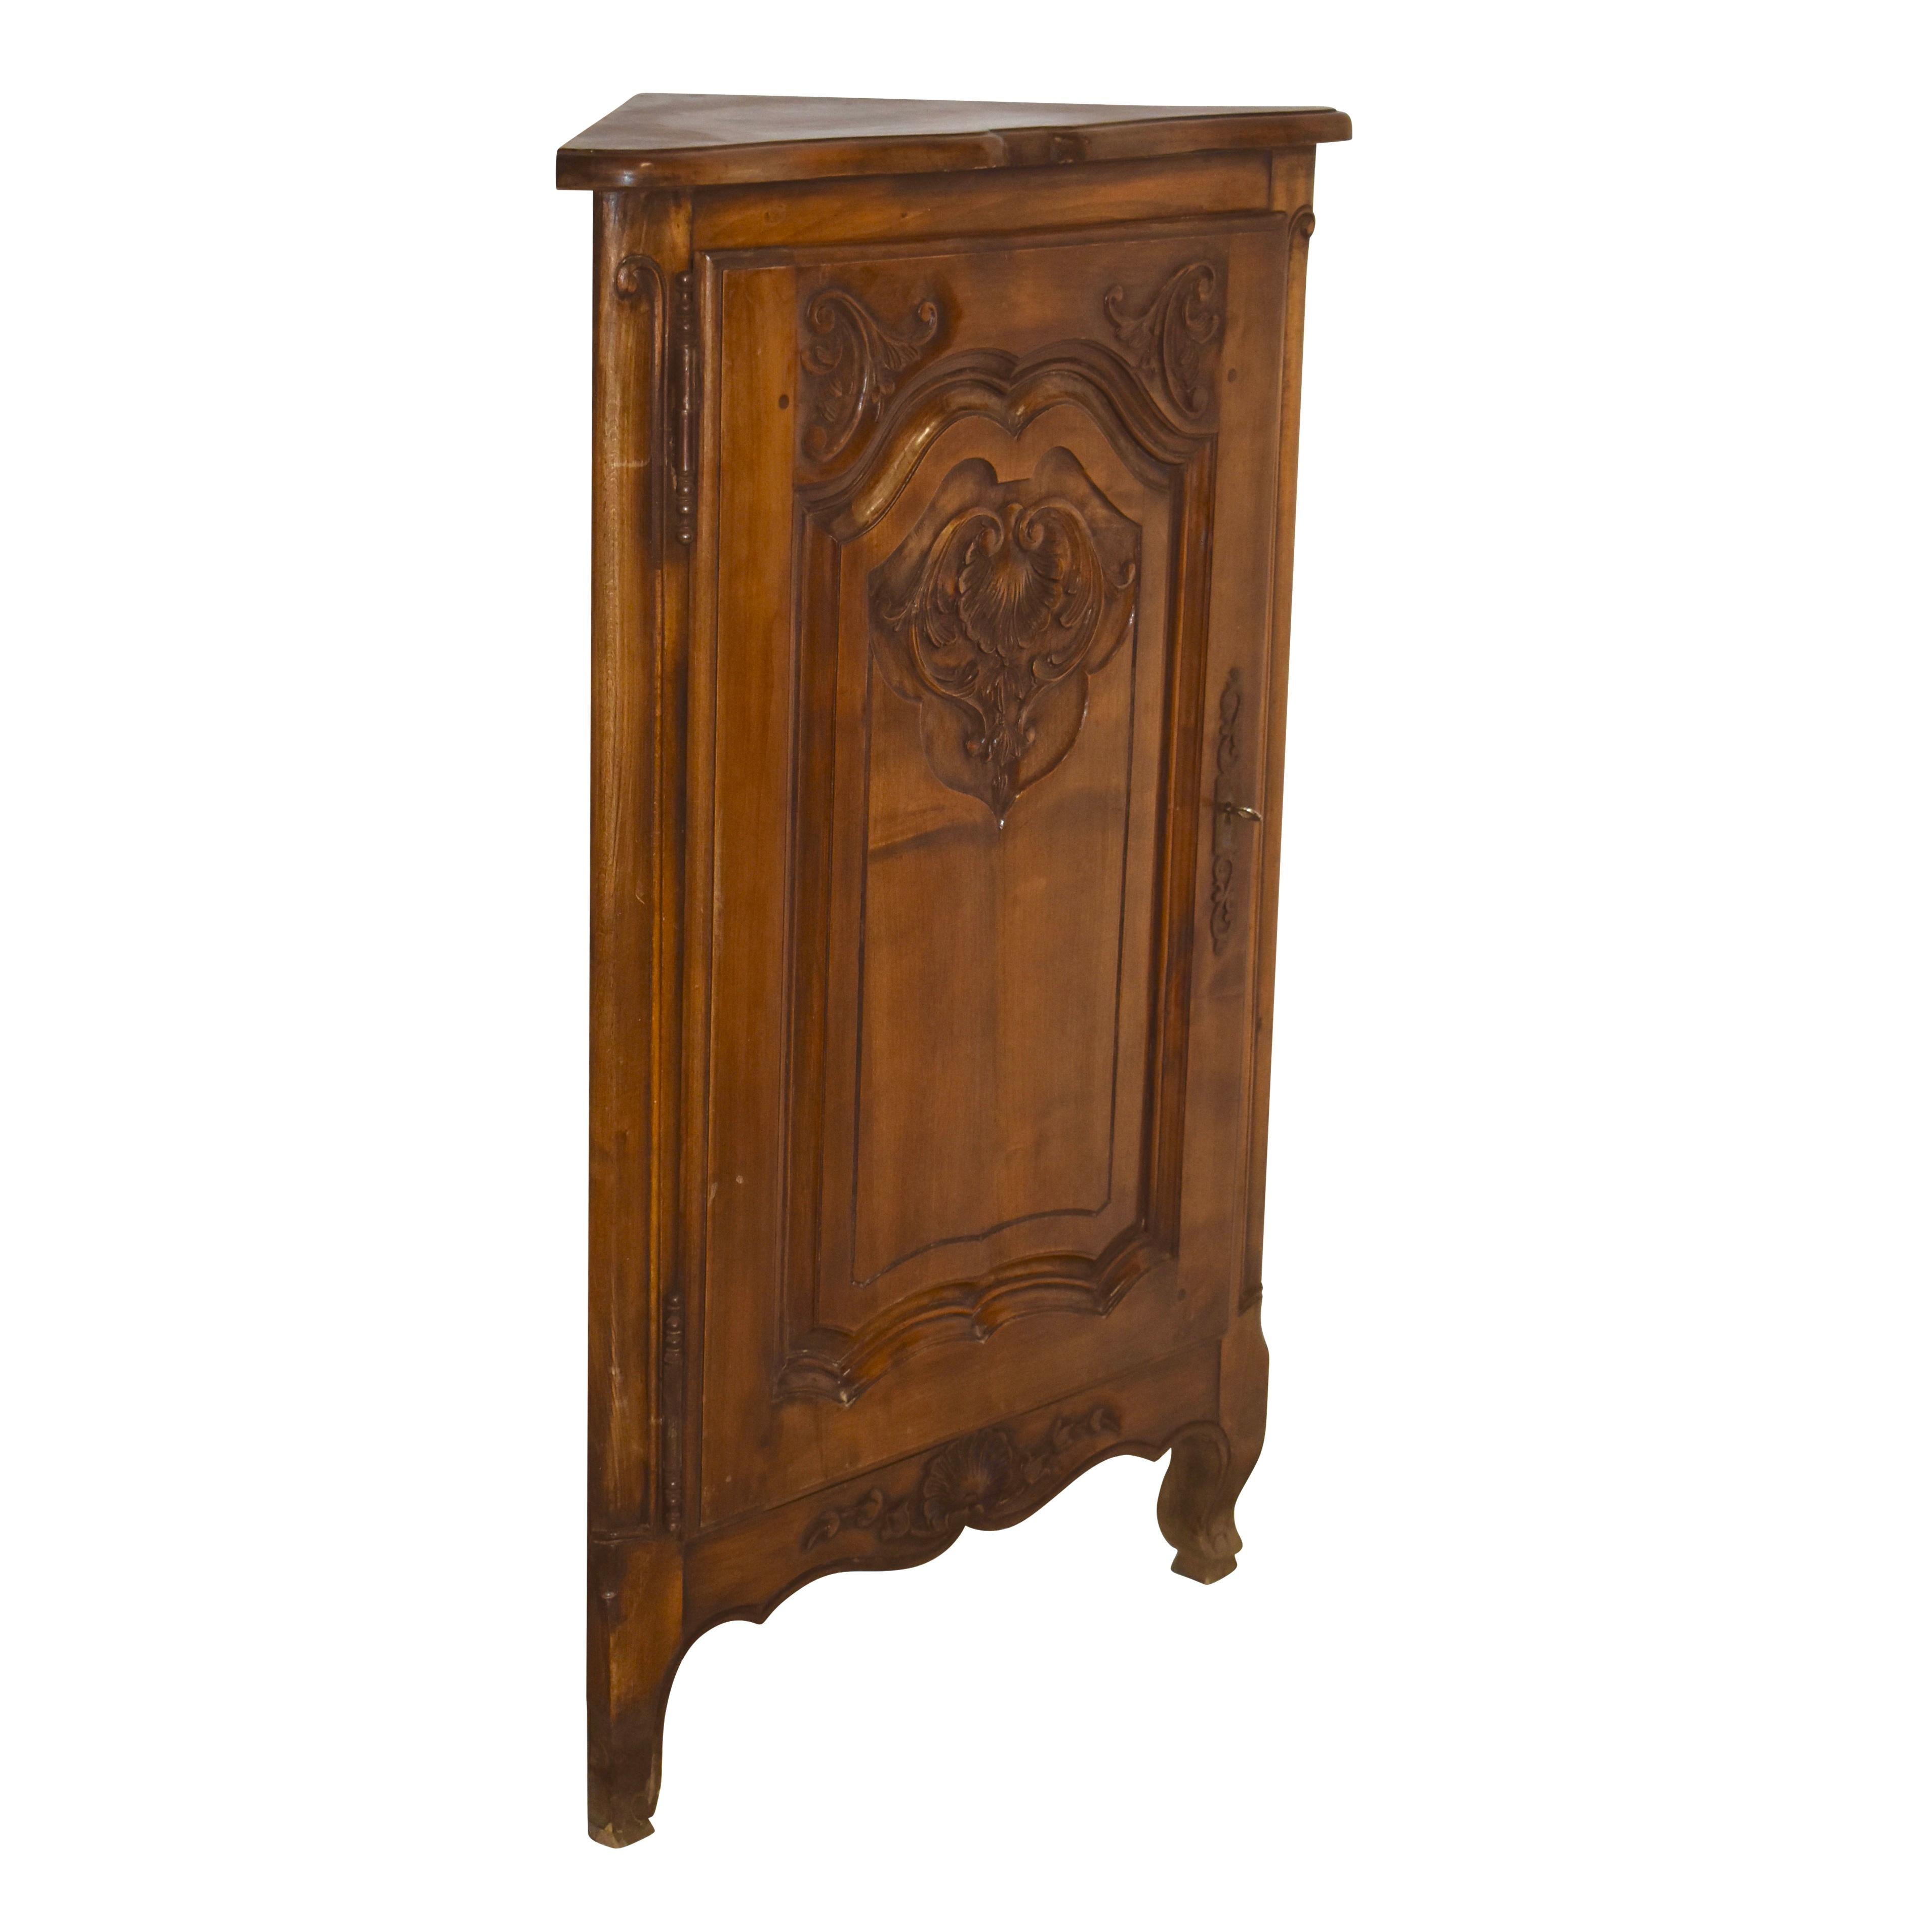 Featuring a Louis XV floral and shell motif, this petite corner cabinet showcases a small footprint and elegant design. The top front edge is beveled and scalloped. An arched raised panel door with a scalloped base reflects the scalloped apron